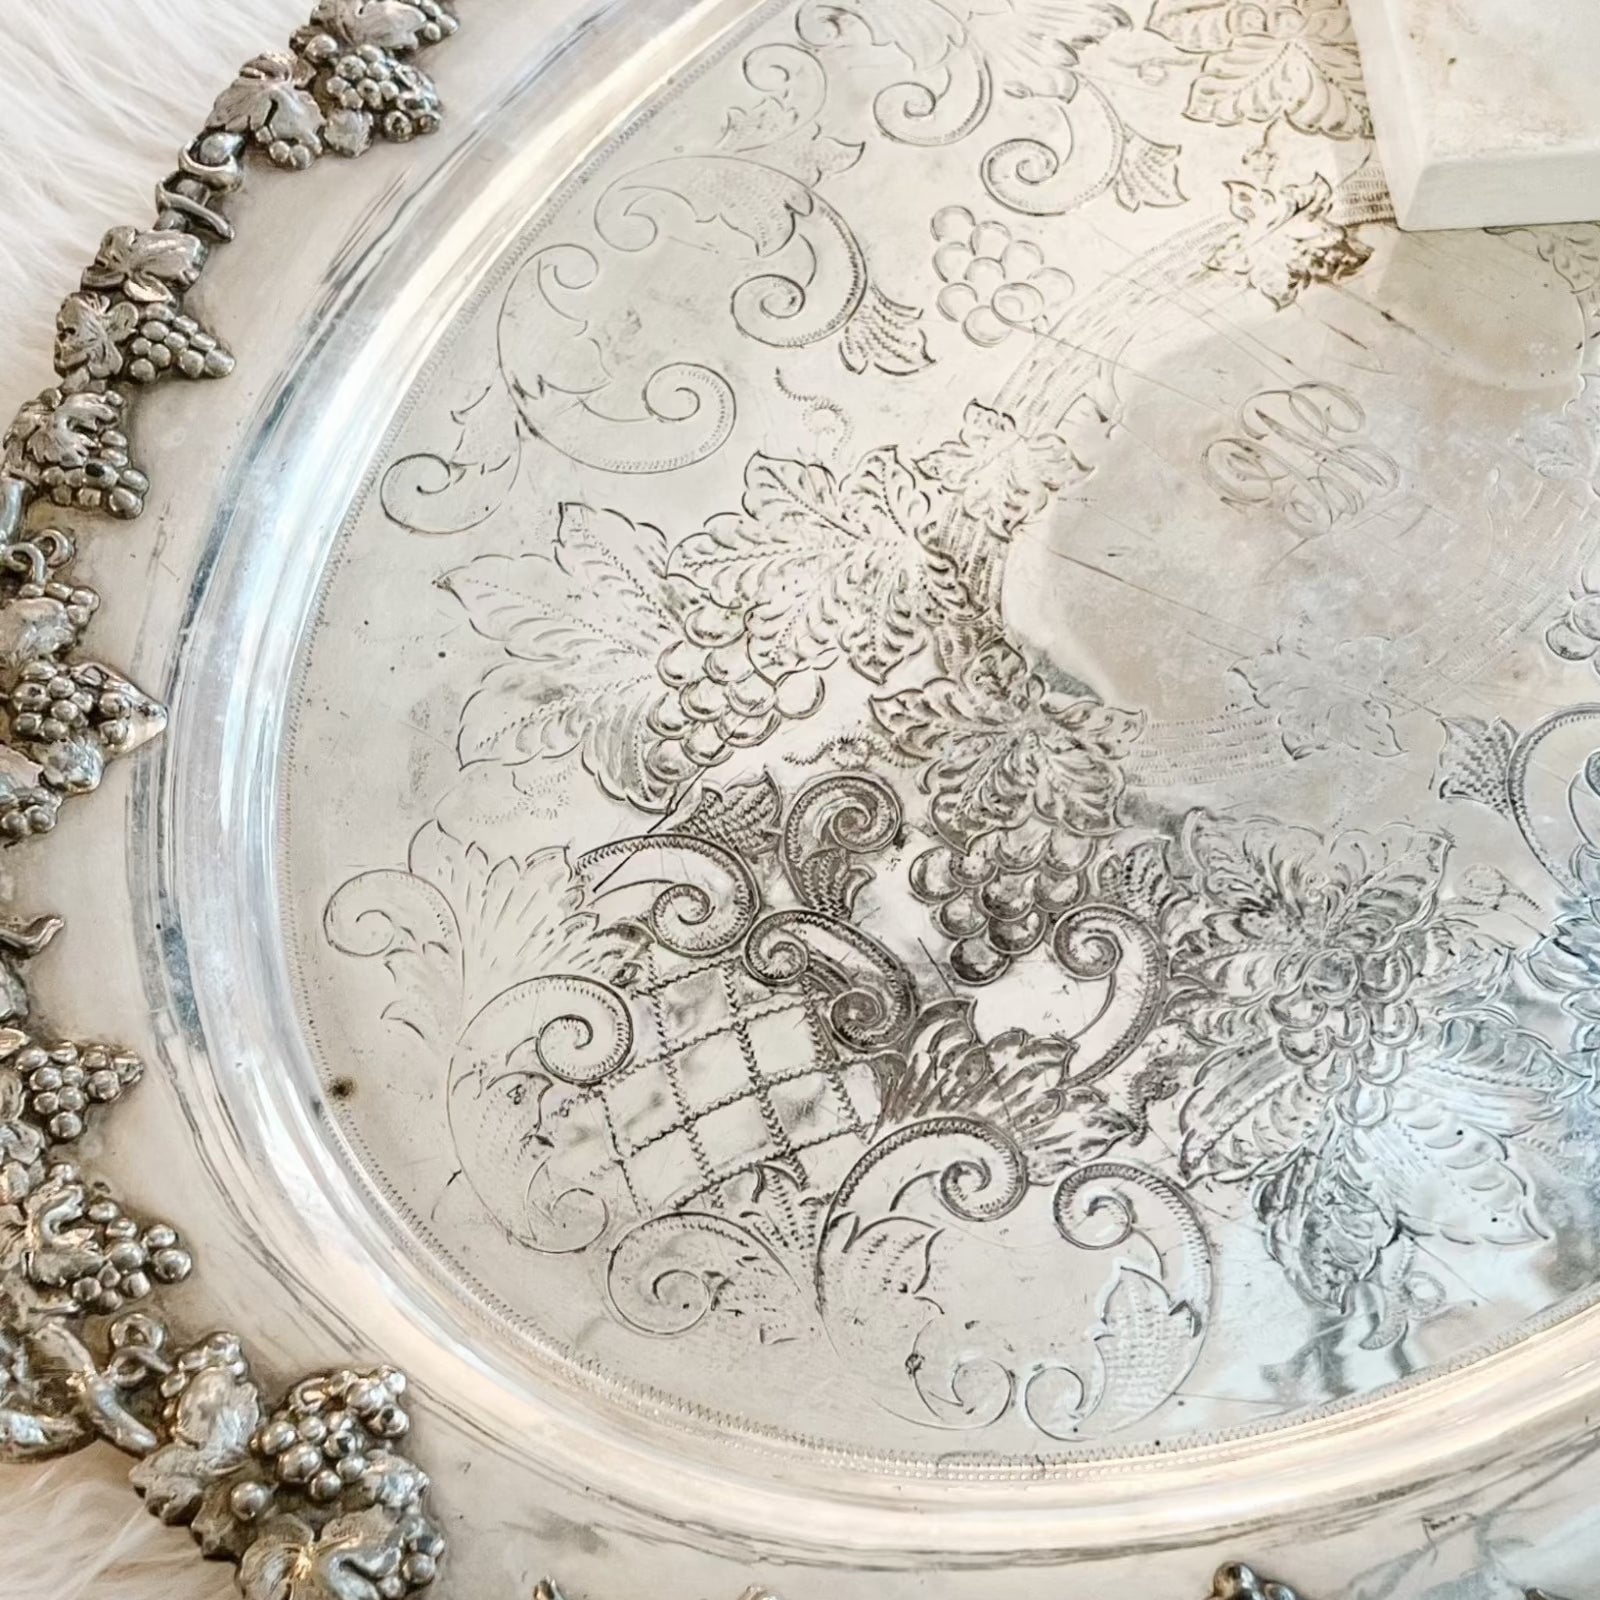 vintage silverplated serving platter with flowers and grapes